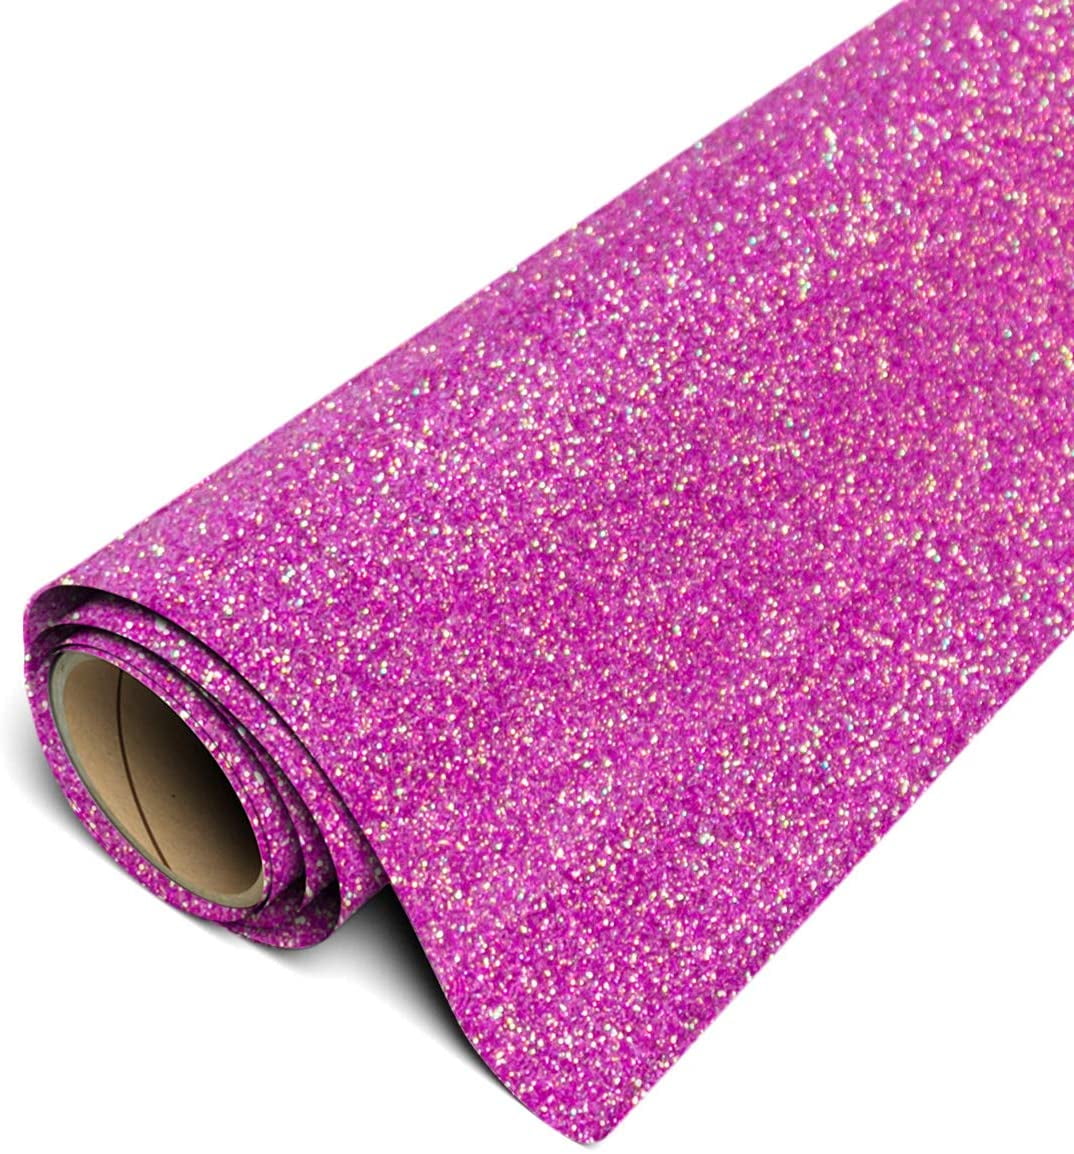  Bright Pink Glitter HTV Heat Transfer Vinly Roll for